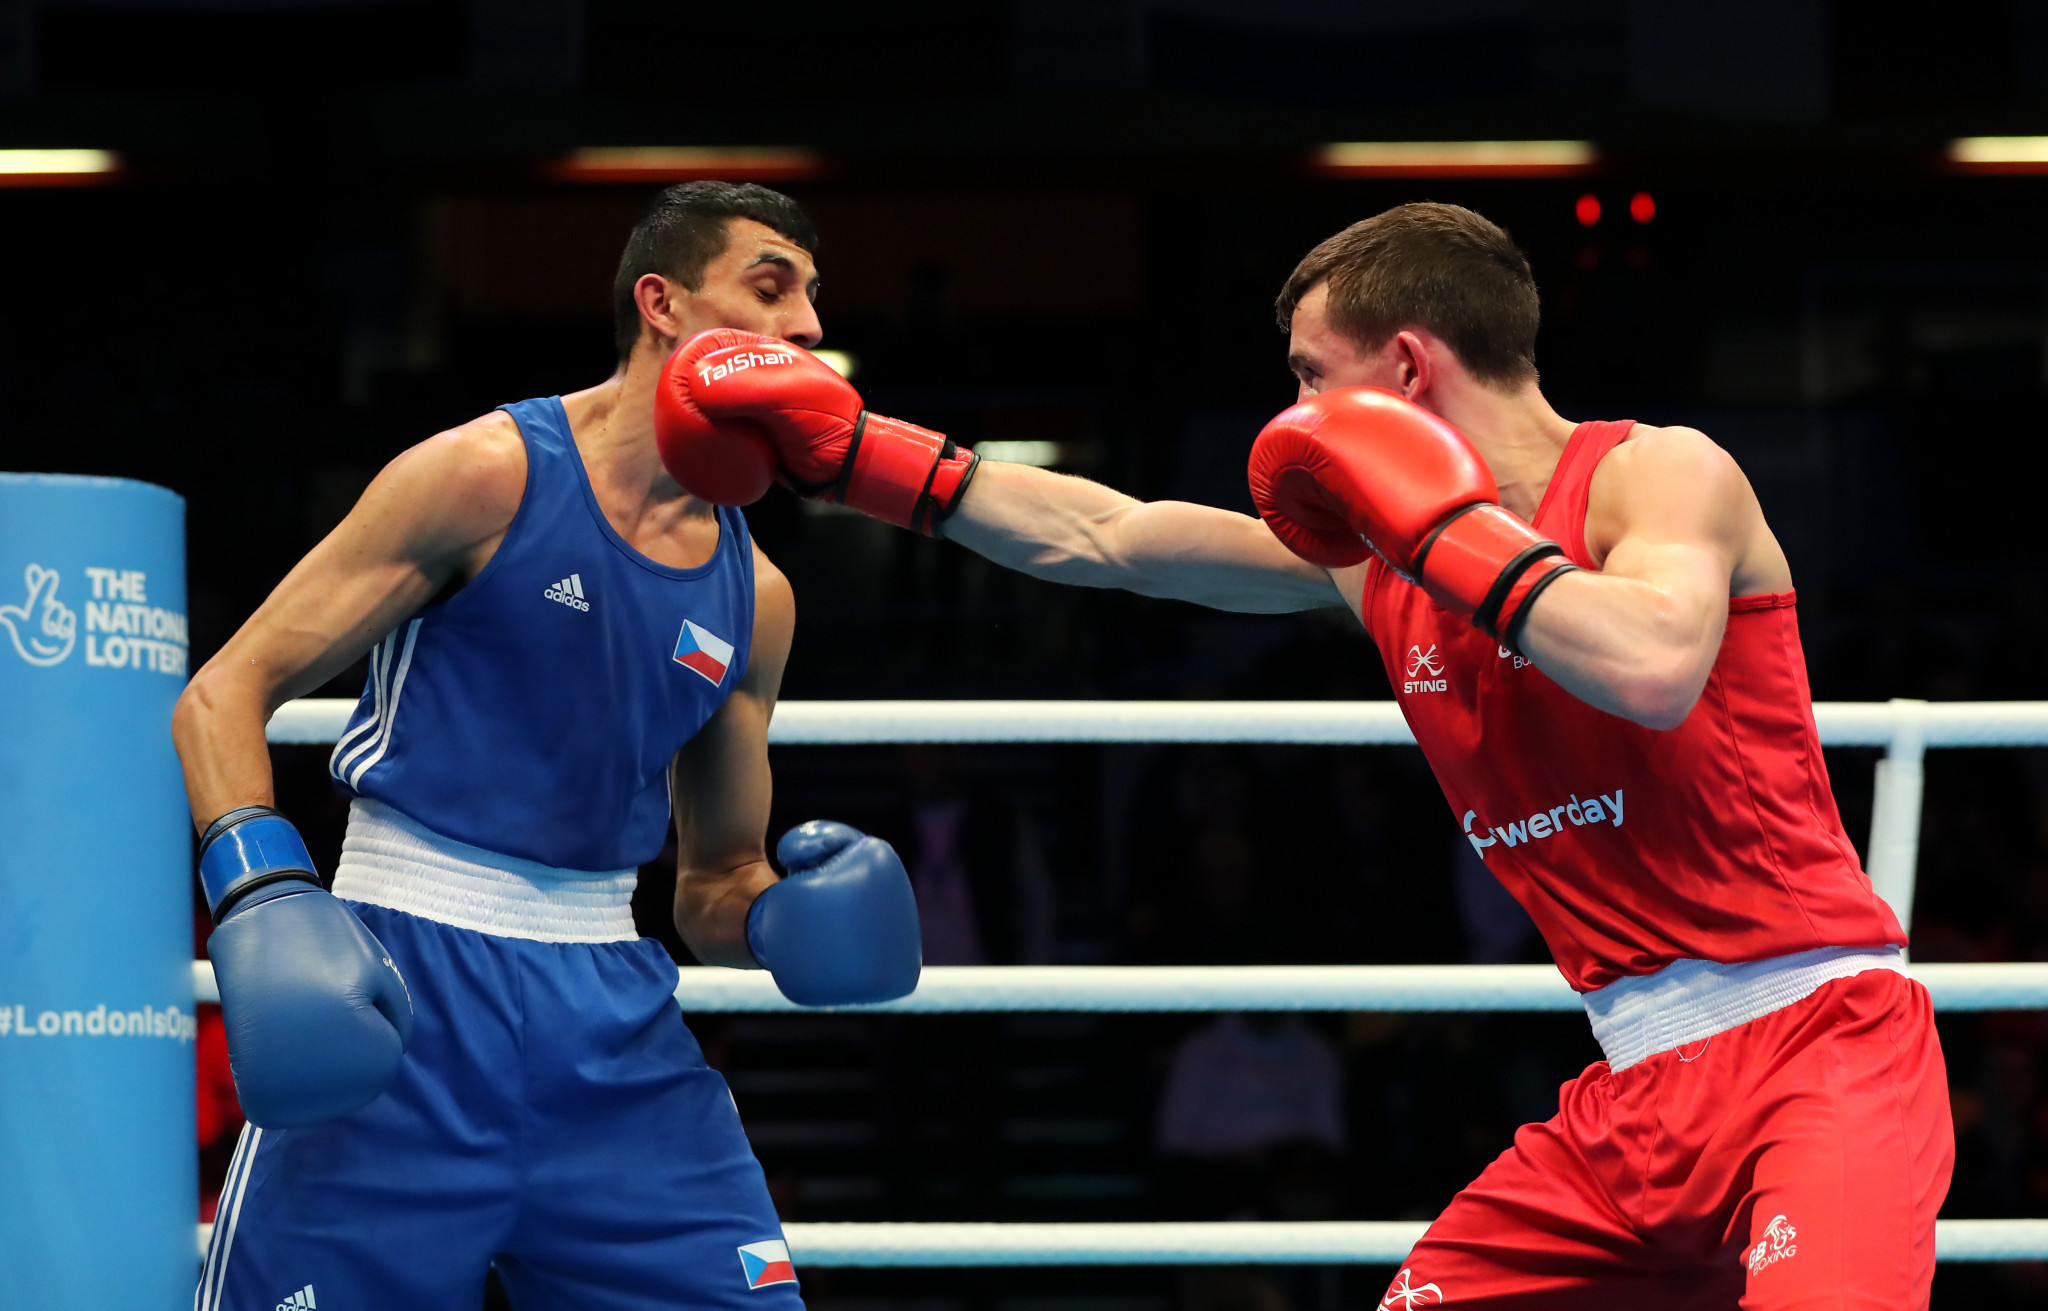 The Czech Boxing Association is set to boycott the IBA World Championships this year ©Getty Images